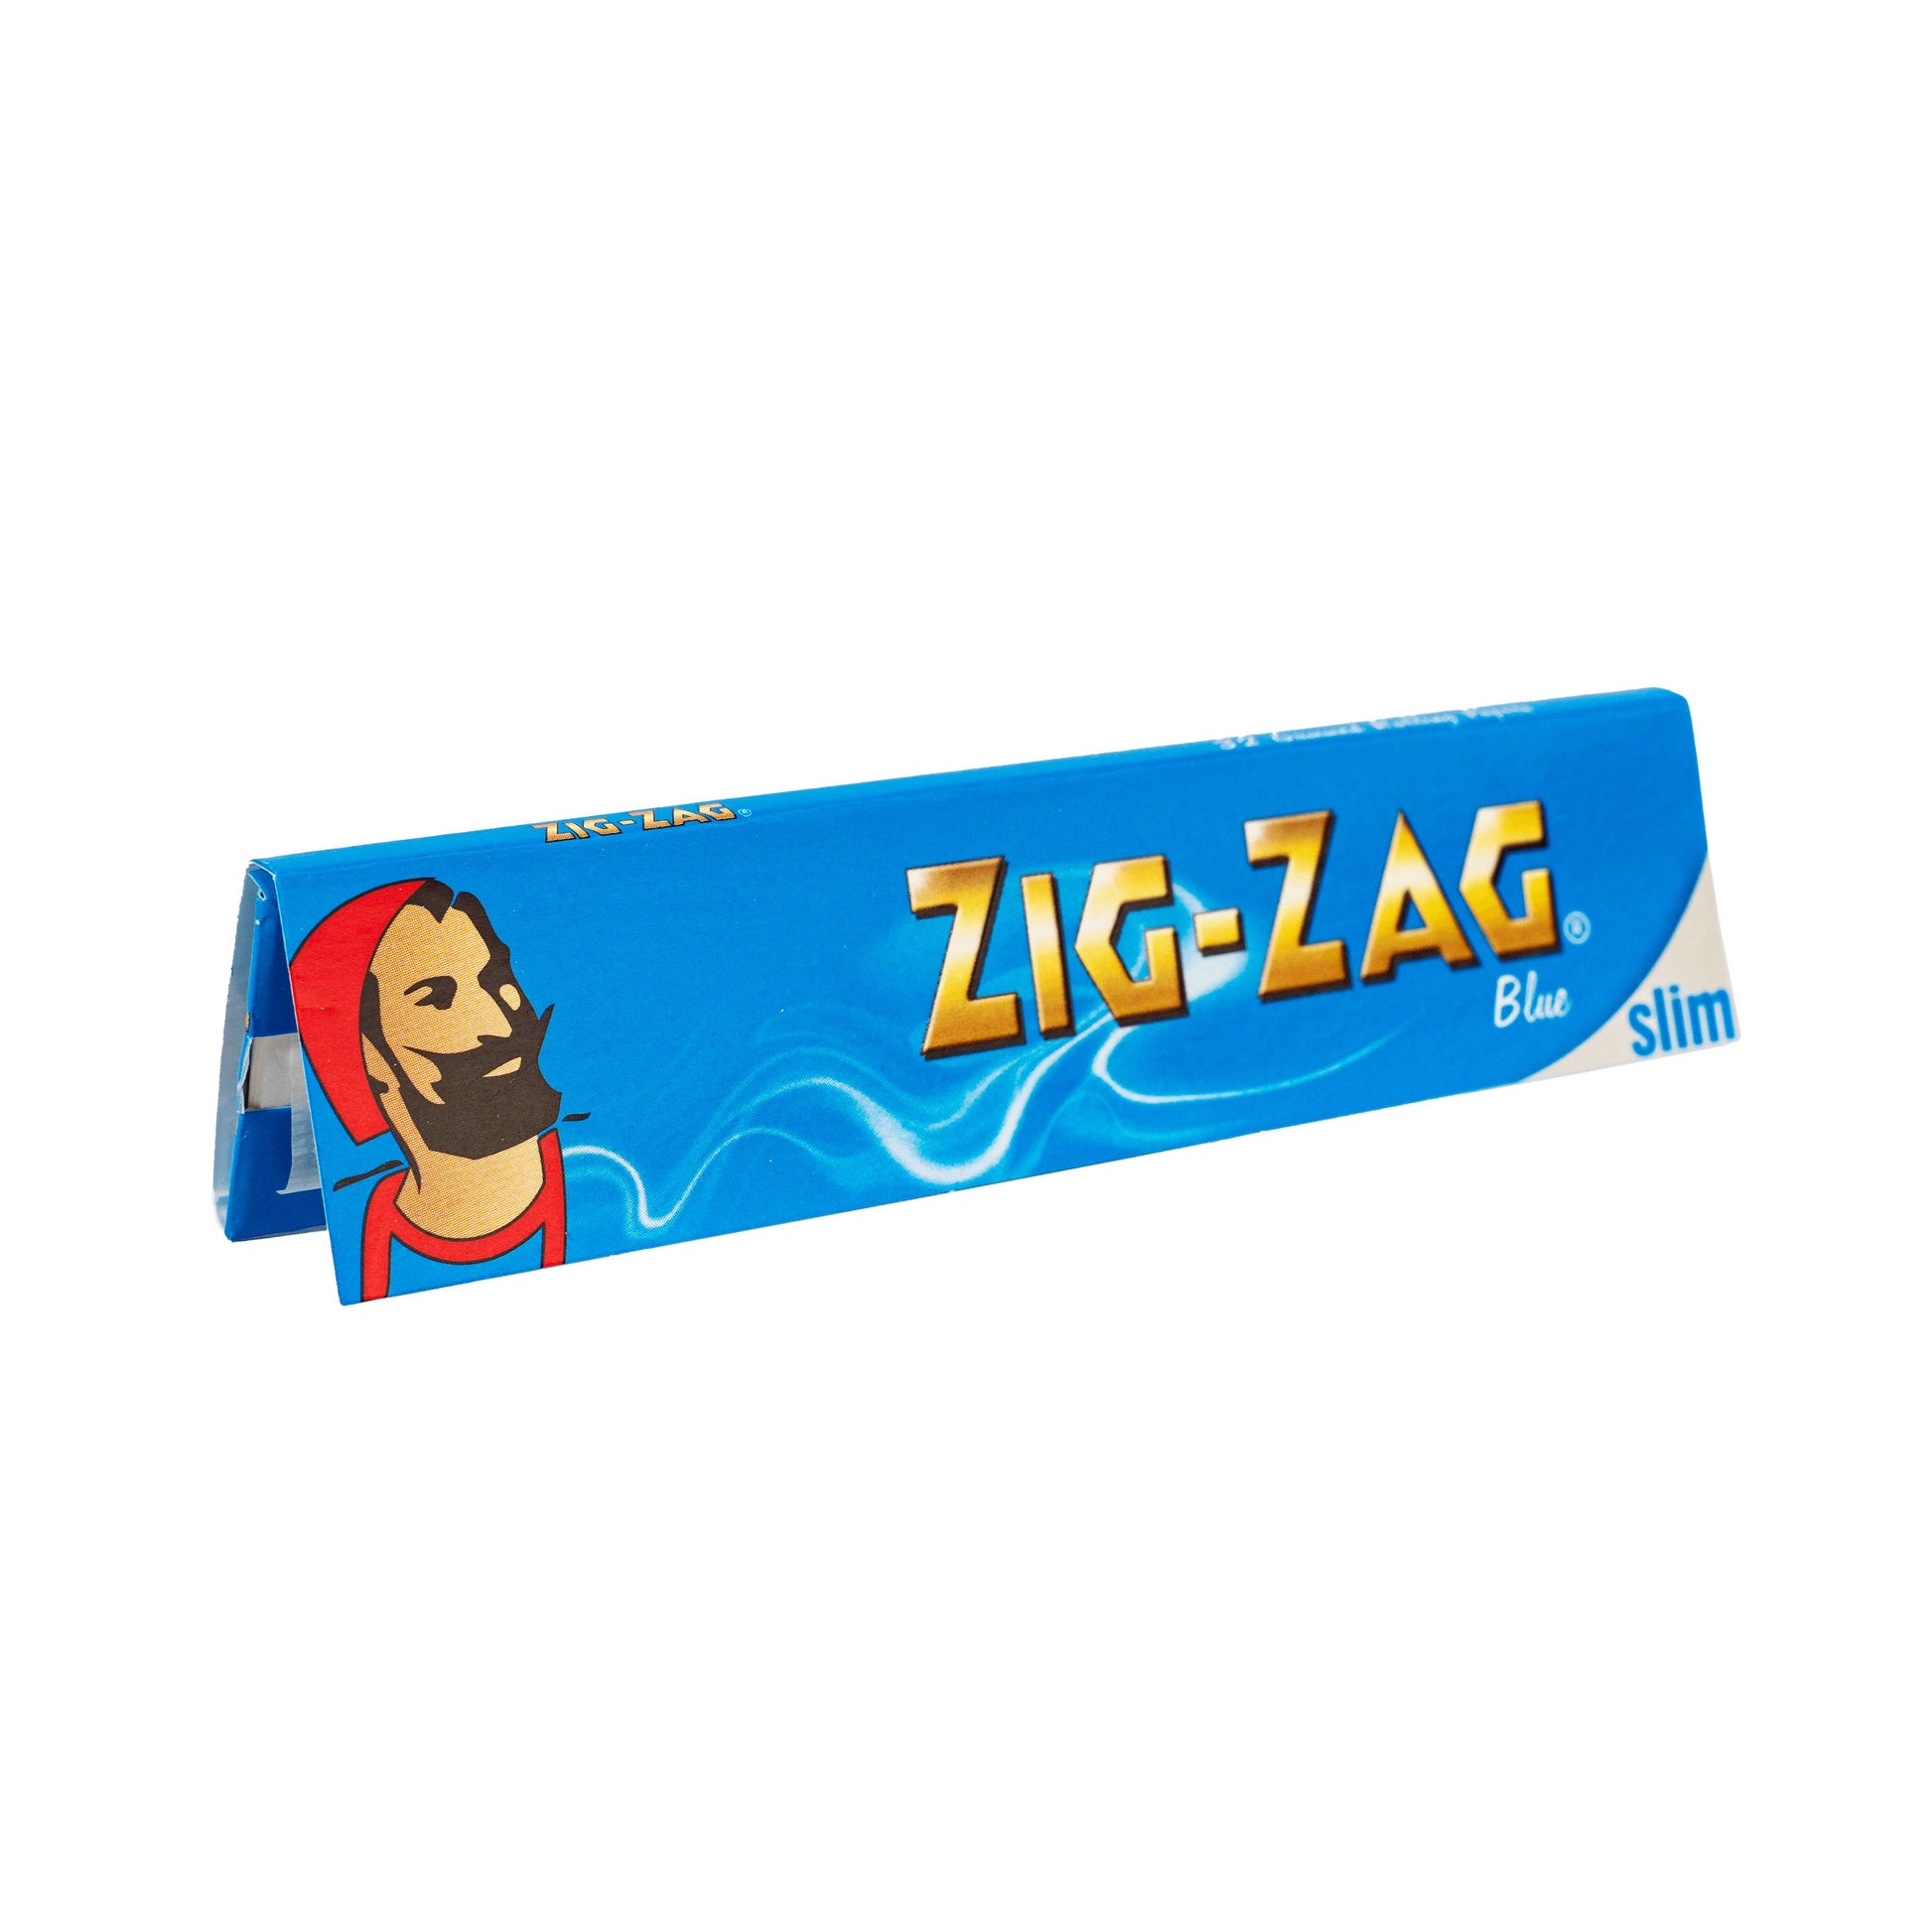 Zig-Zag Rolling Papers - Blue King Size - - Rolling Papers - Zig-Zag - Cali Tobacconist